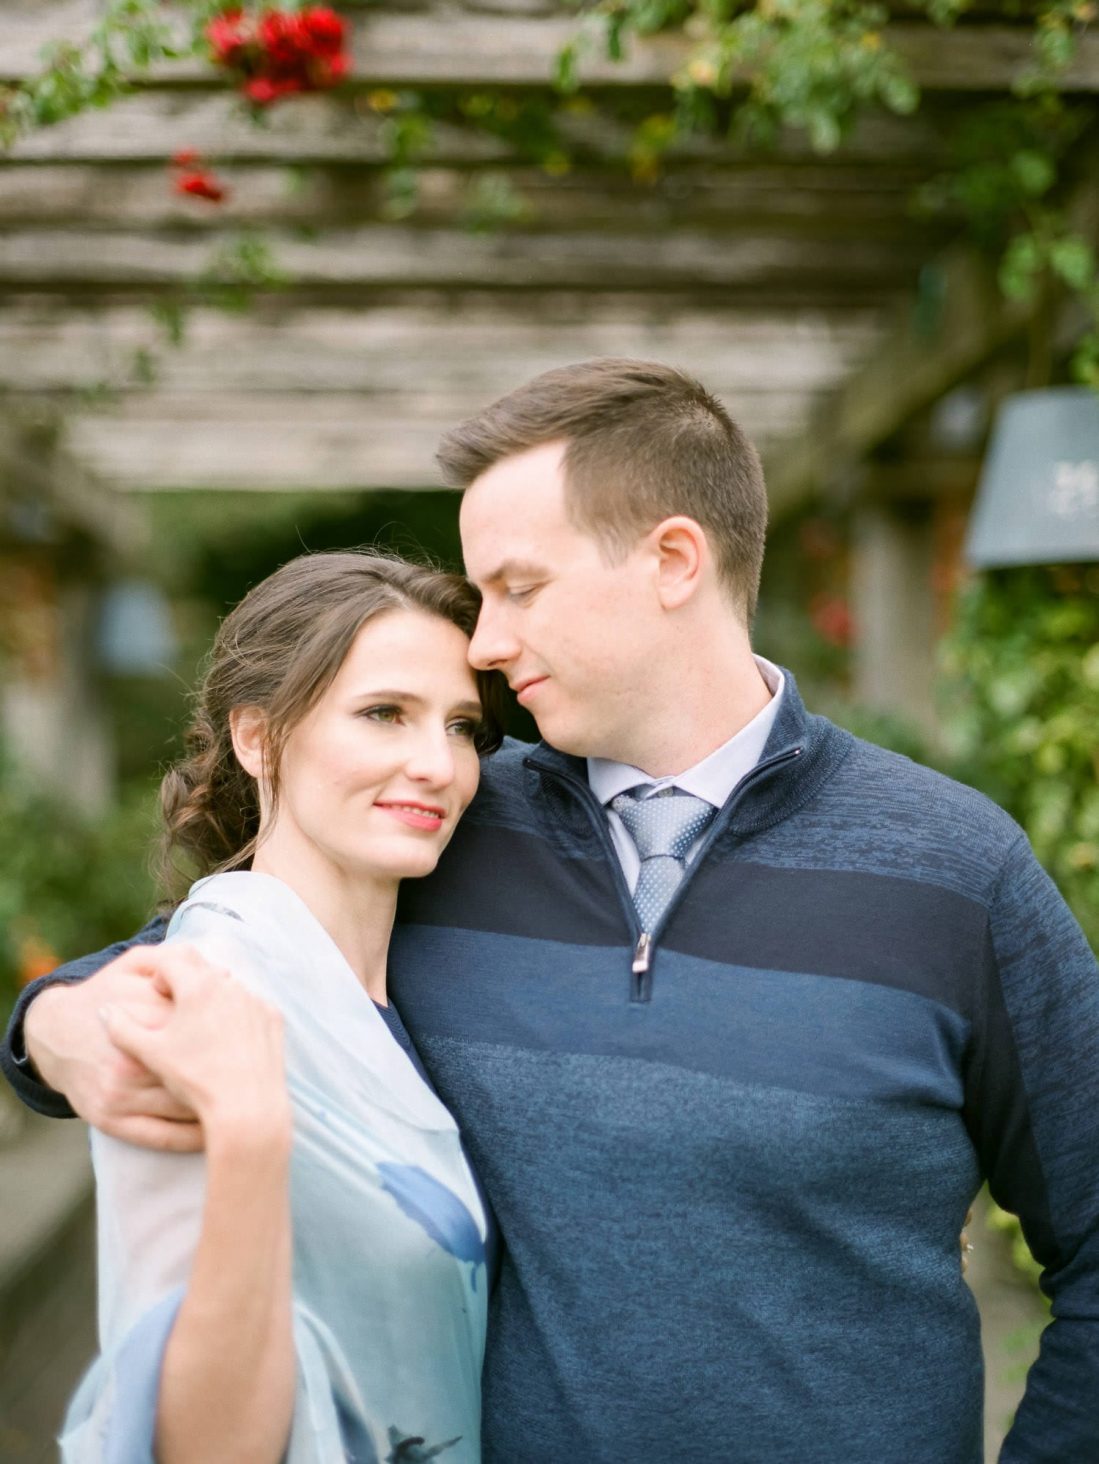 Engagement photo session at UBC Rose Garden with Vancouver Fine Art Wedding Photographer